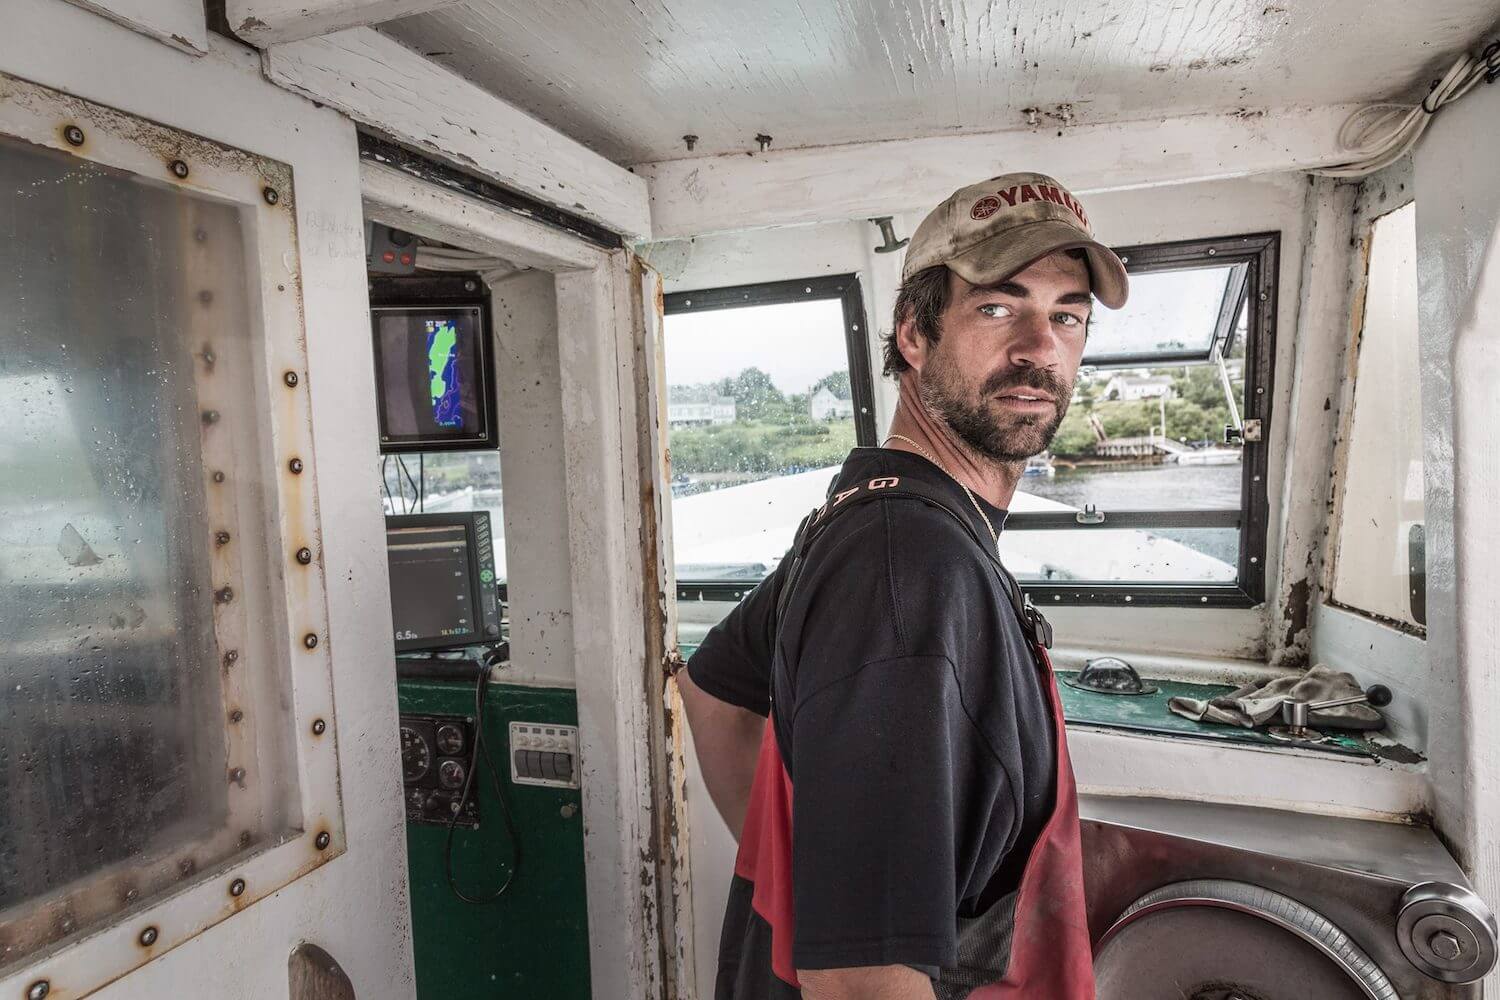 Herman Coombs, a lobster fisher in Orrs Island, Maine wears a a black t-shirt and looks back at the camera while on his fishing boat. (June 2020)